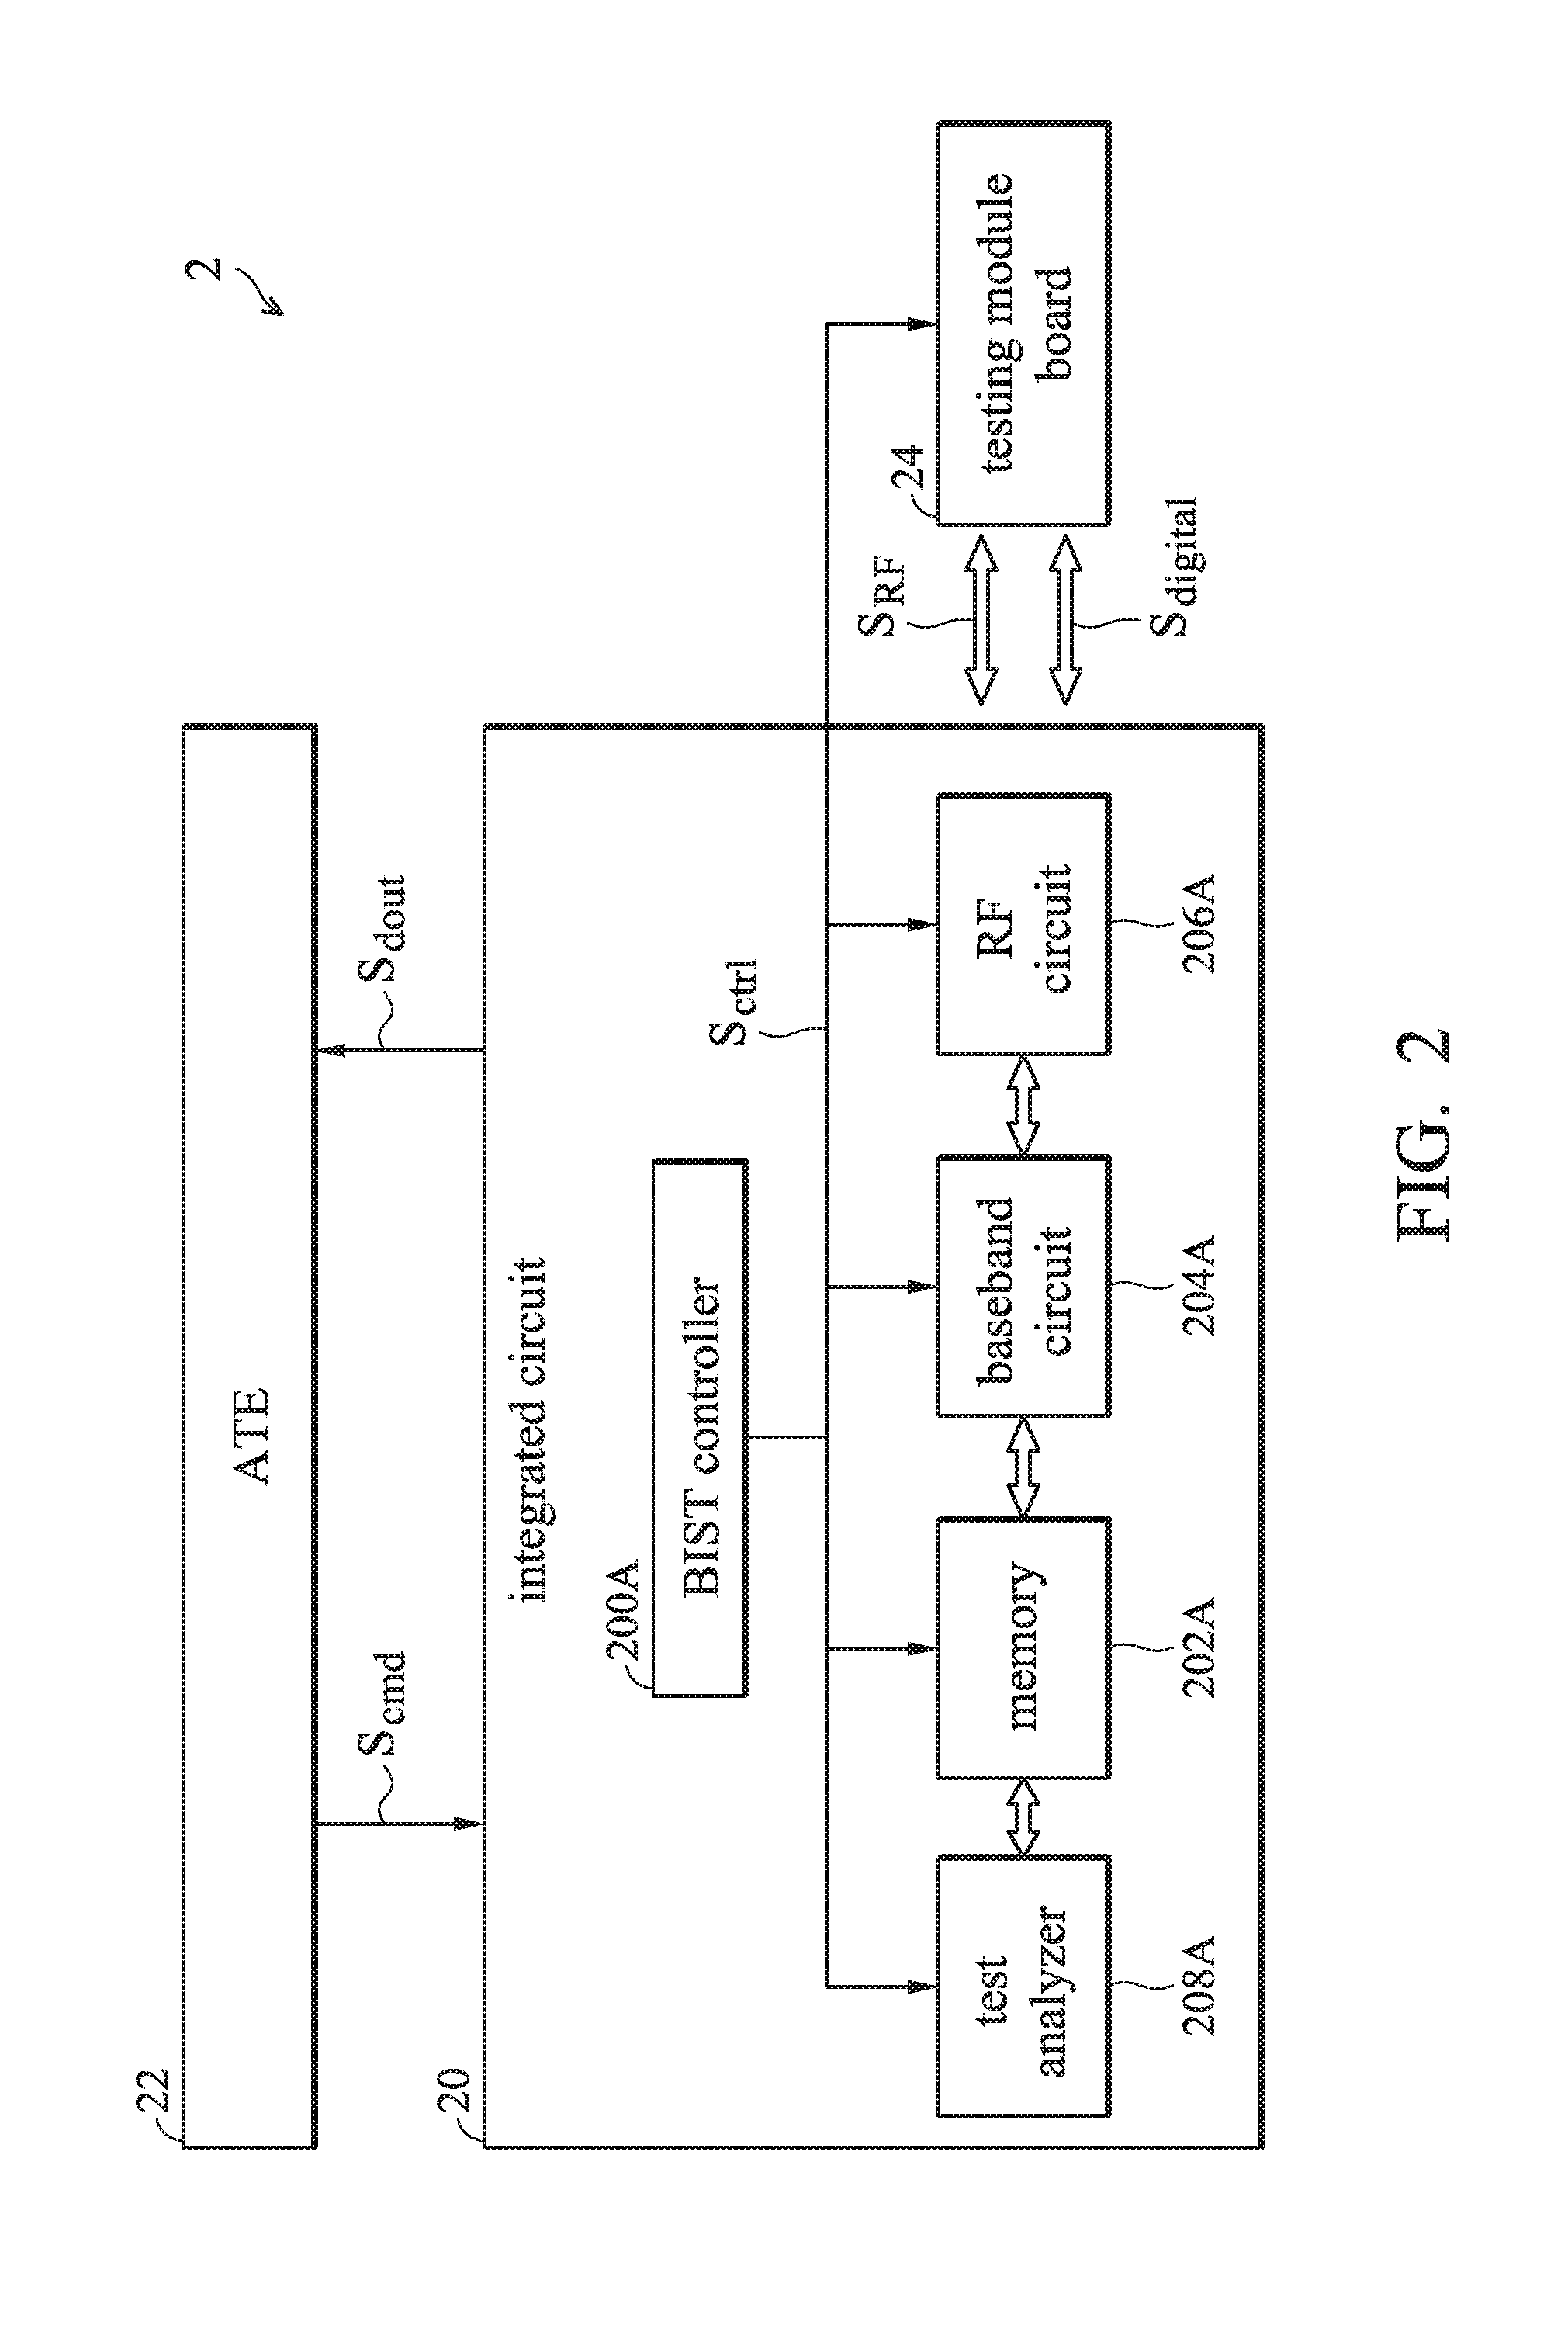 RF testing system using integrated circuit